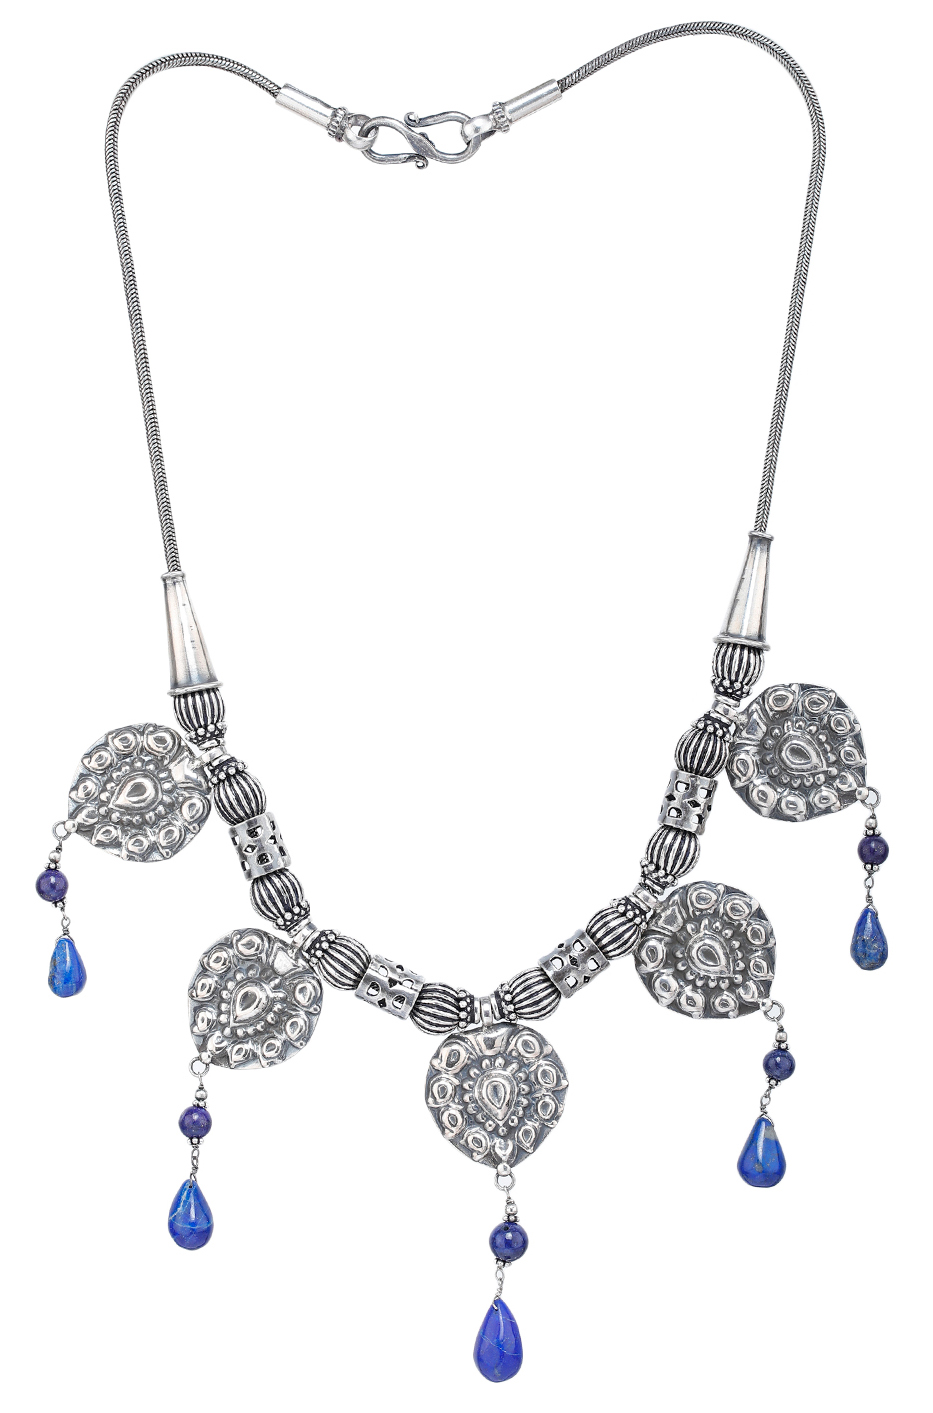 Lapis Lazuli Ethnic Necklace with Earrings